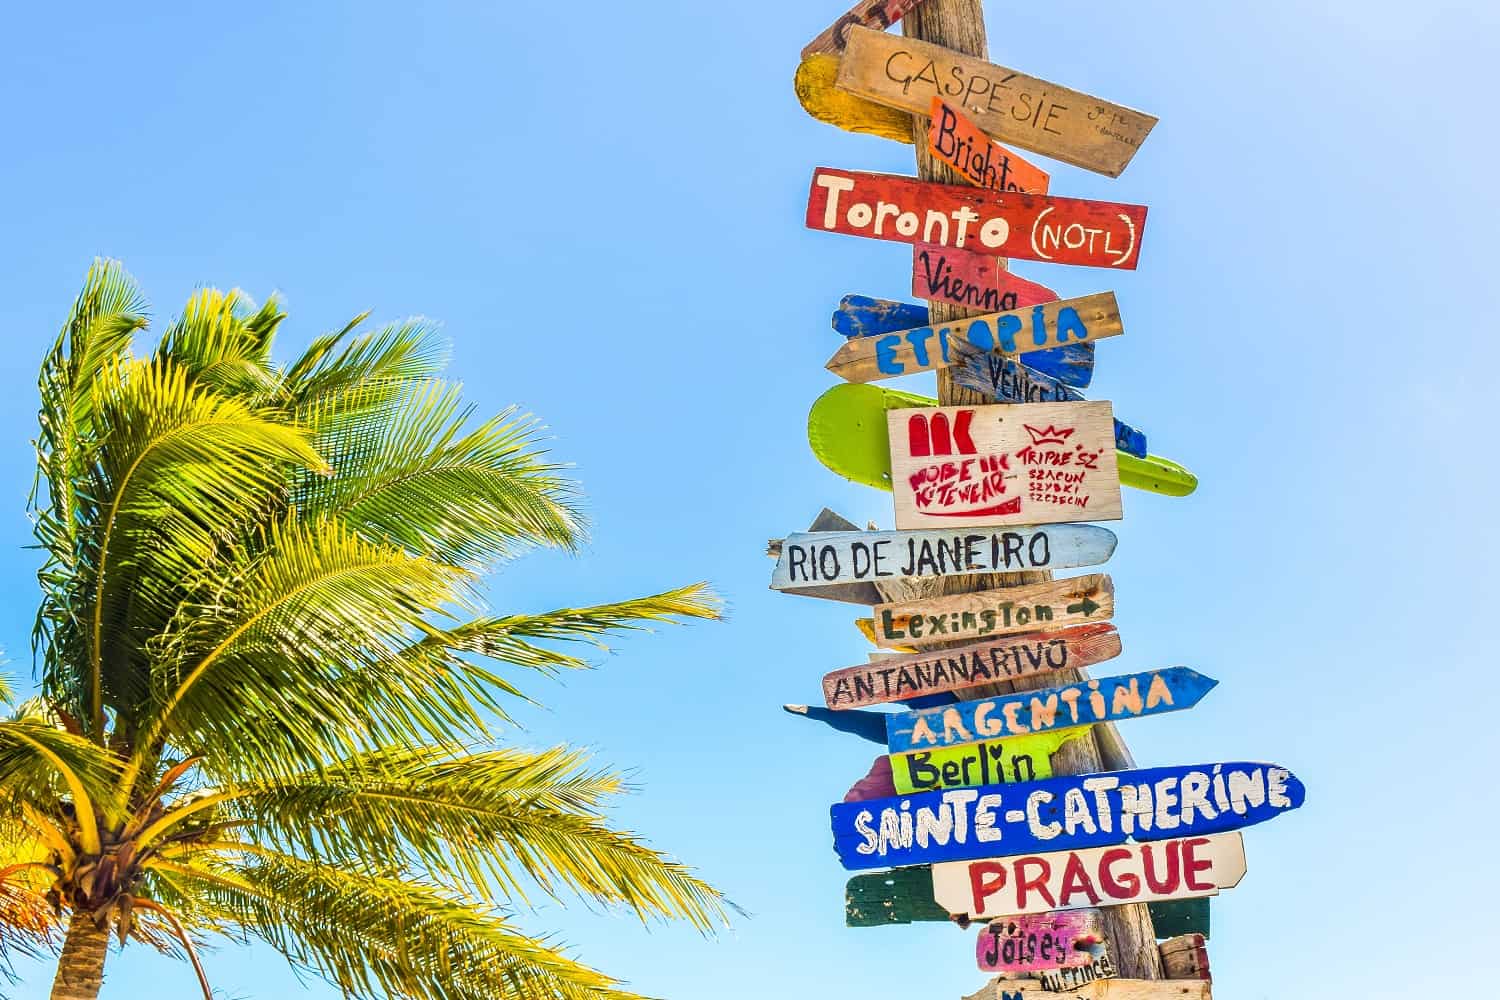 directional signs on a wooden pole by the palm tree